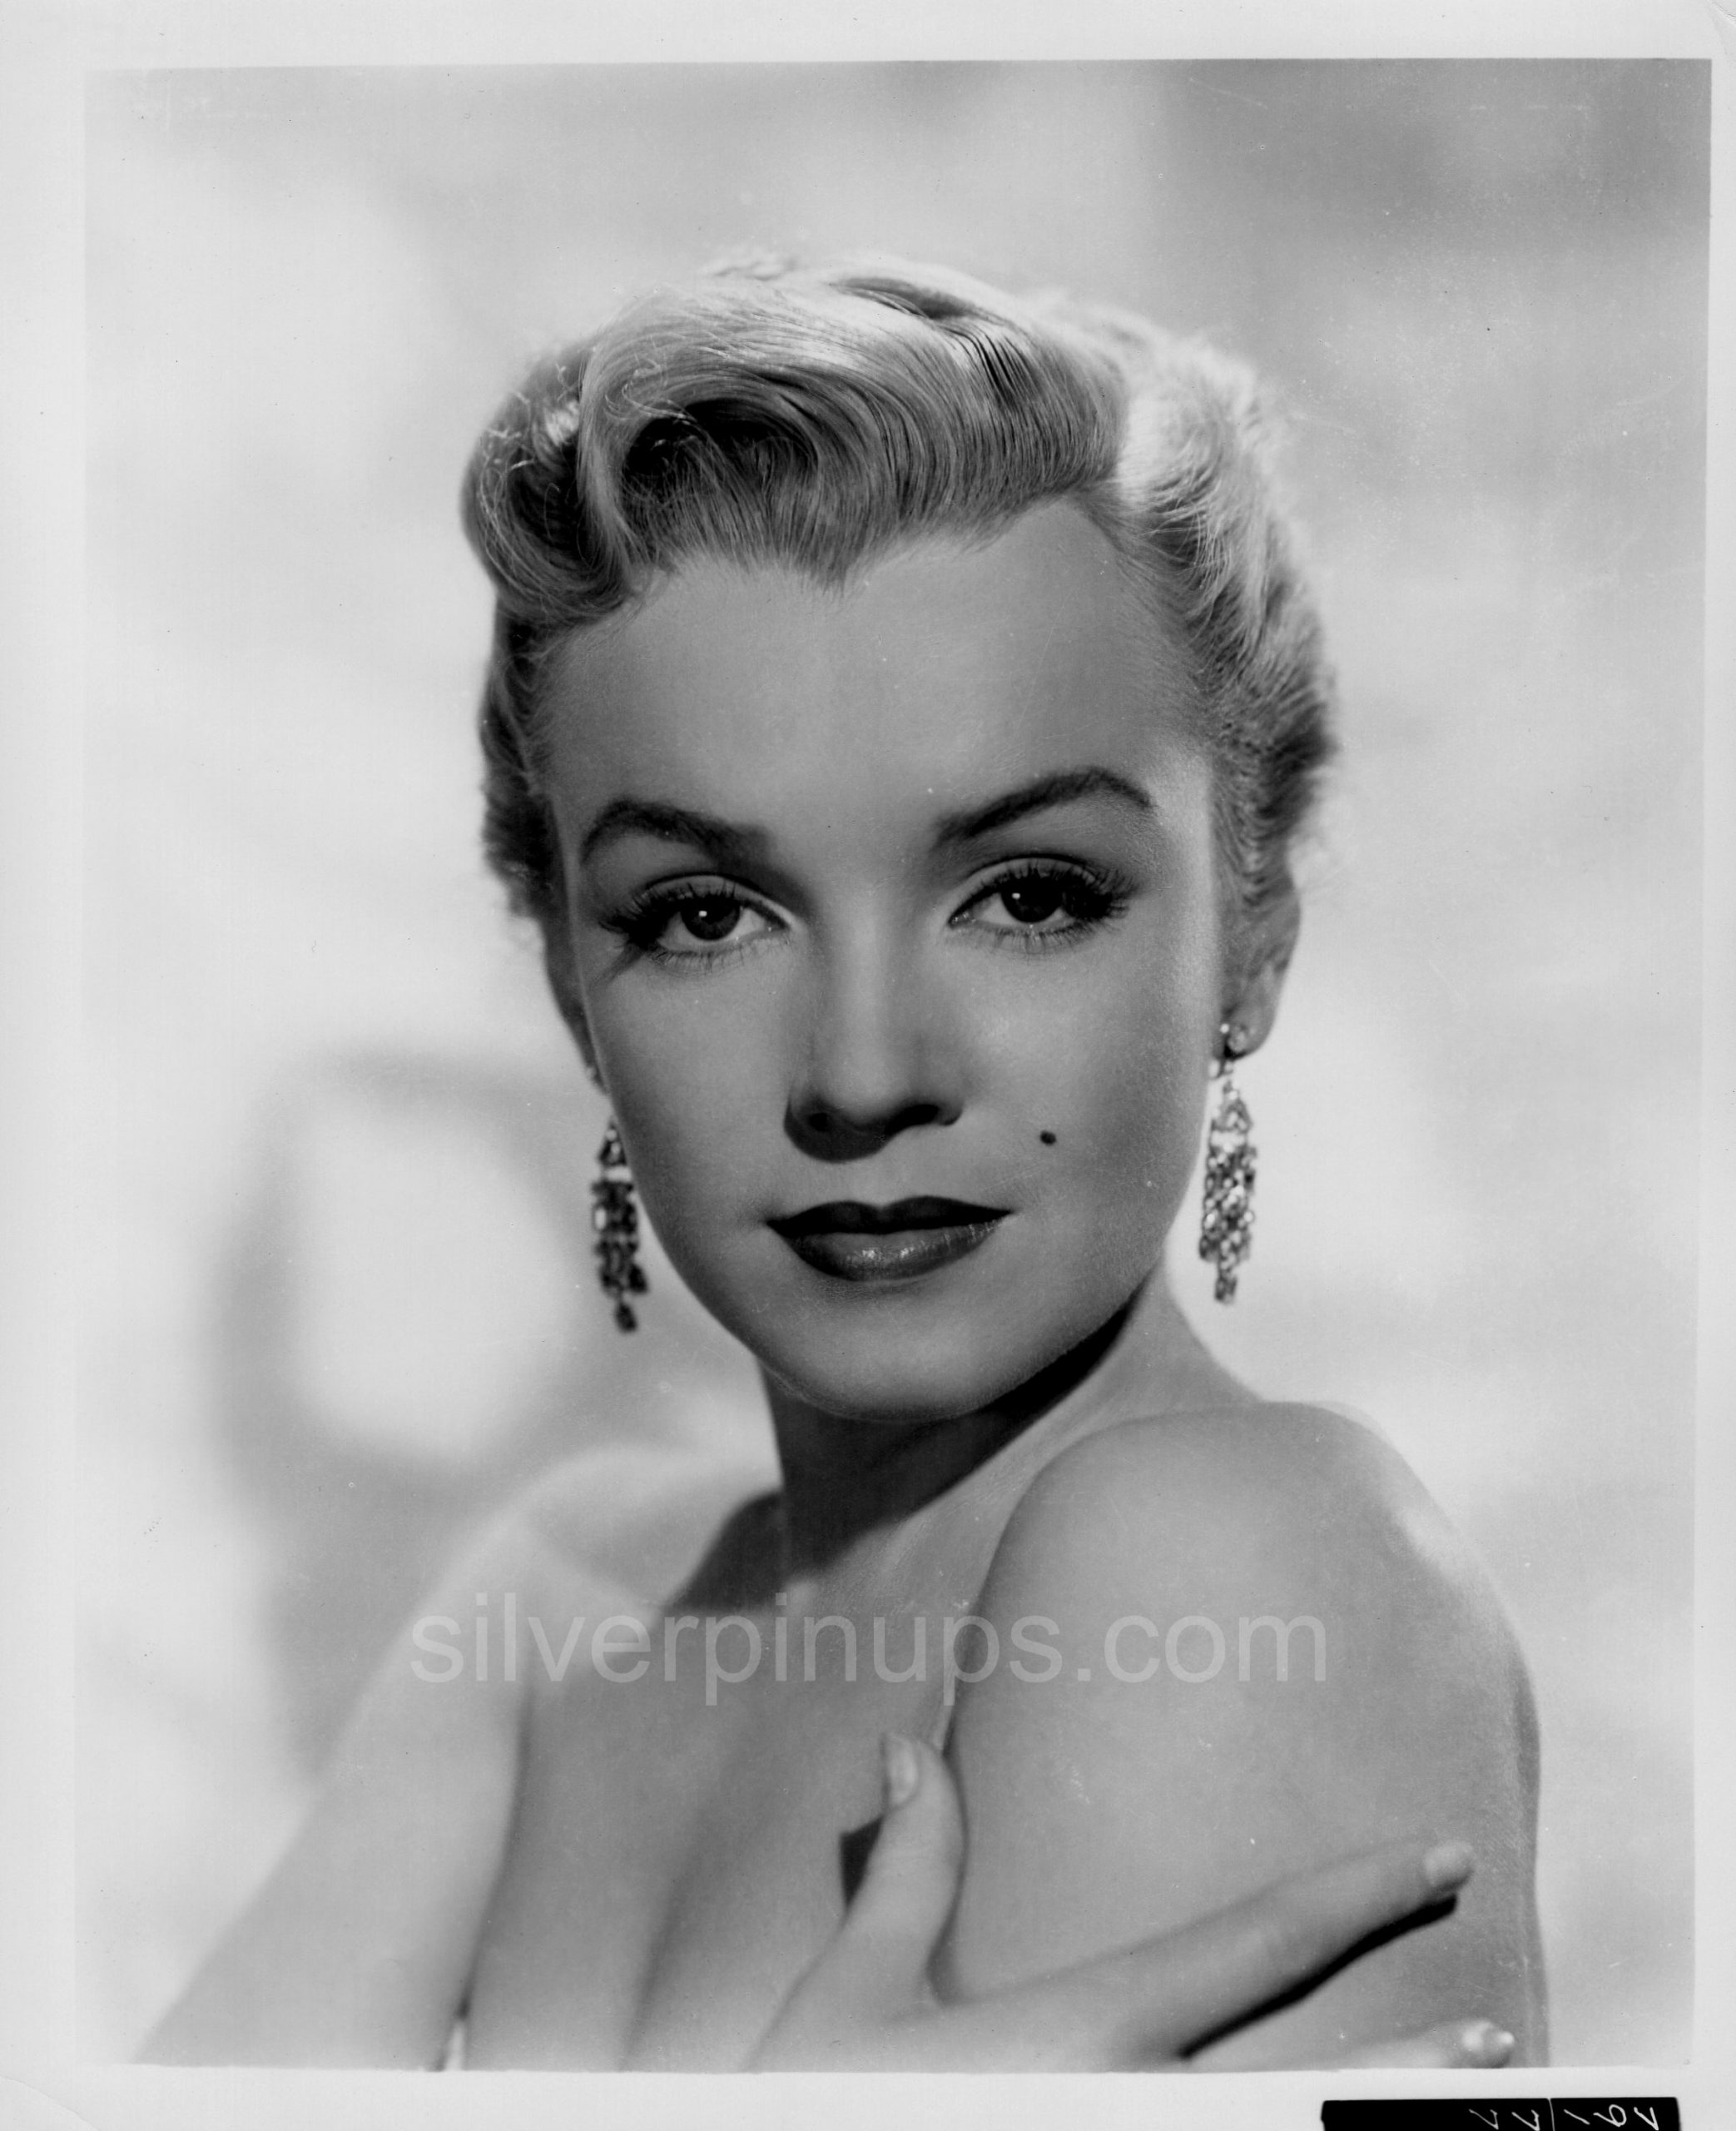 Orig 1950 Marilyn Monroe Dazzling Beauty Early Glamour Portrait “all About Eve” Silverpinups